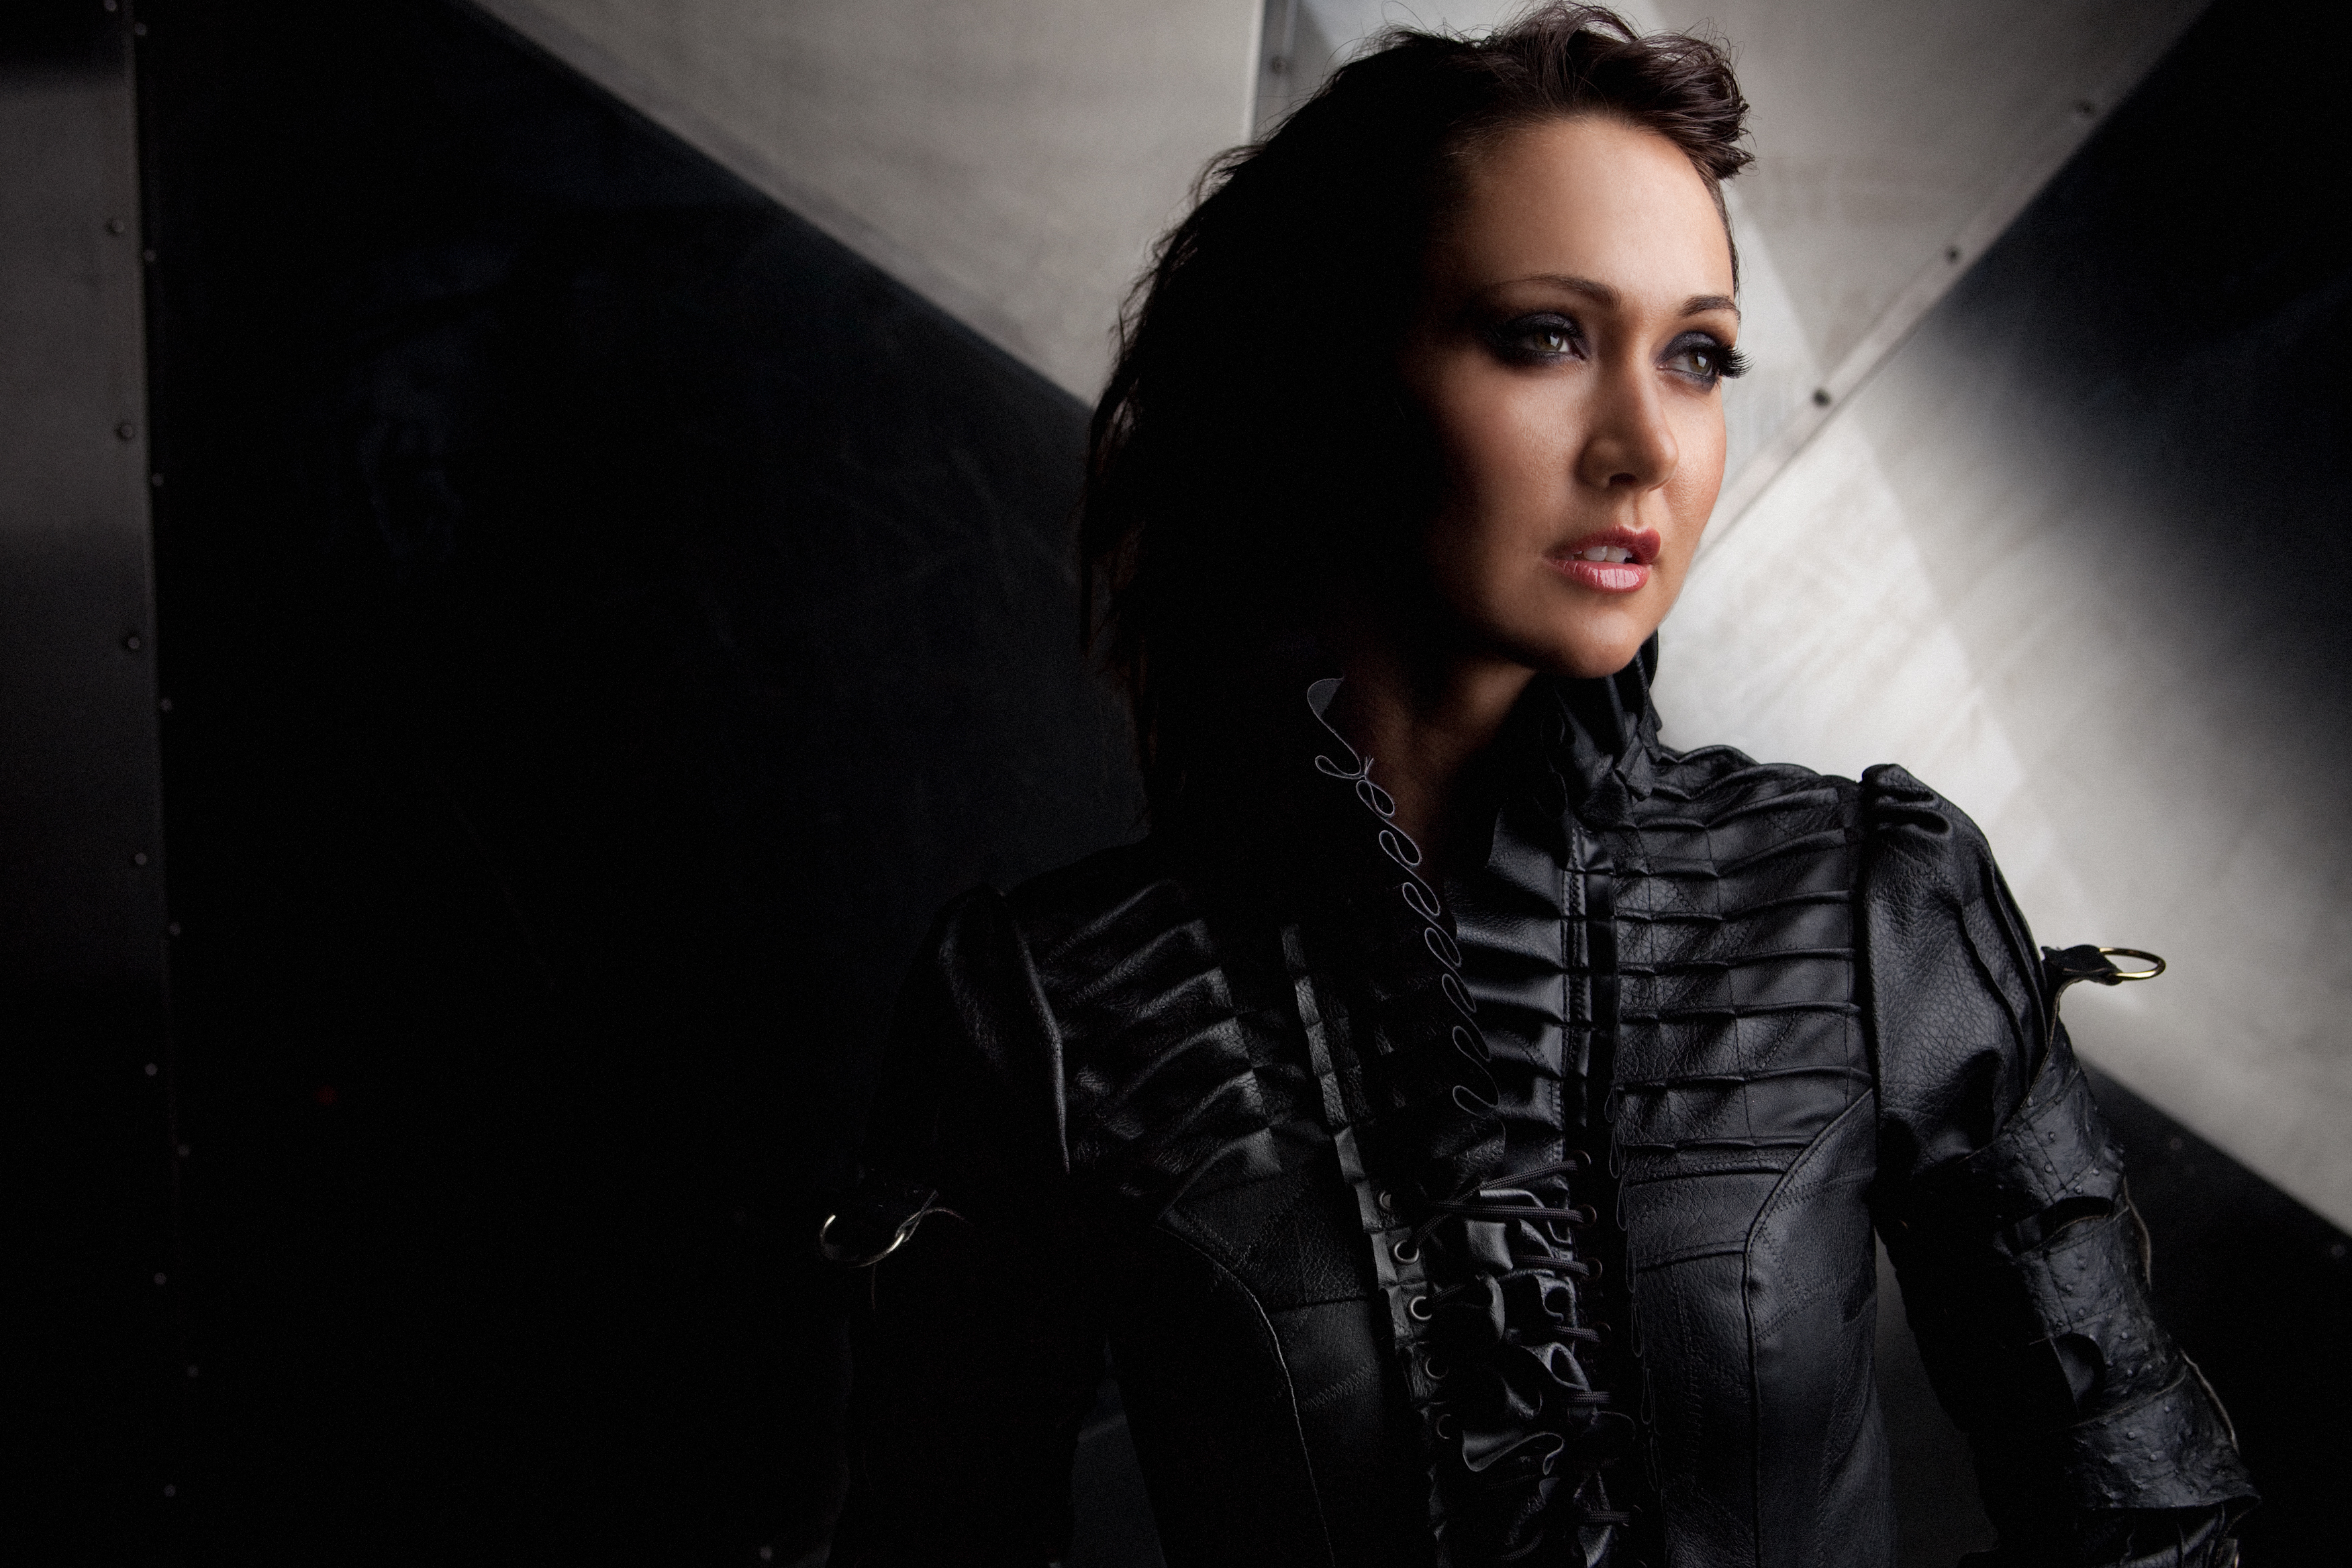 Interview with Jessica Chobot